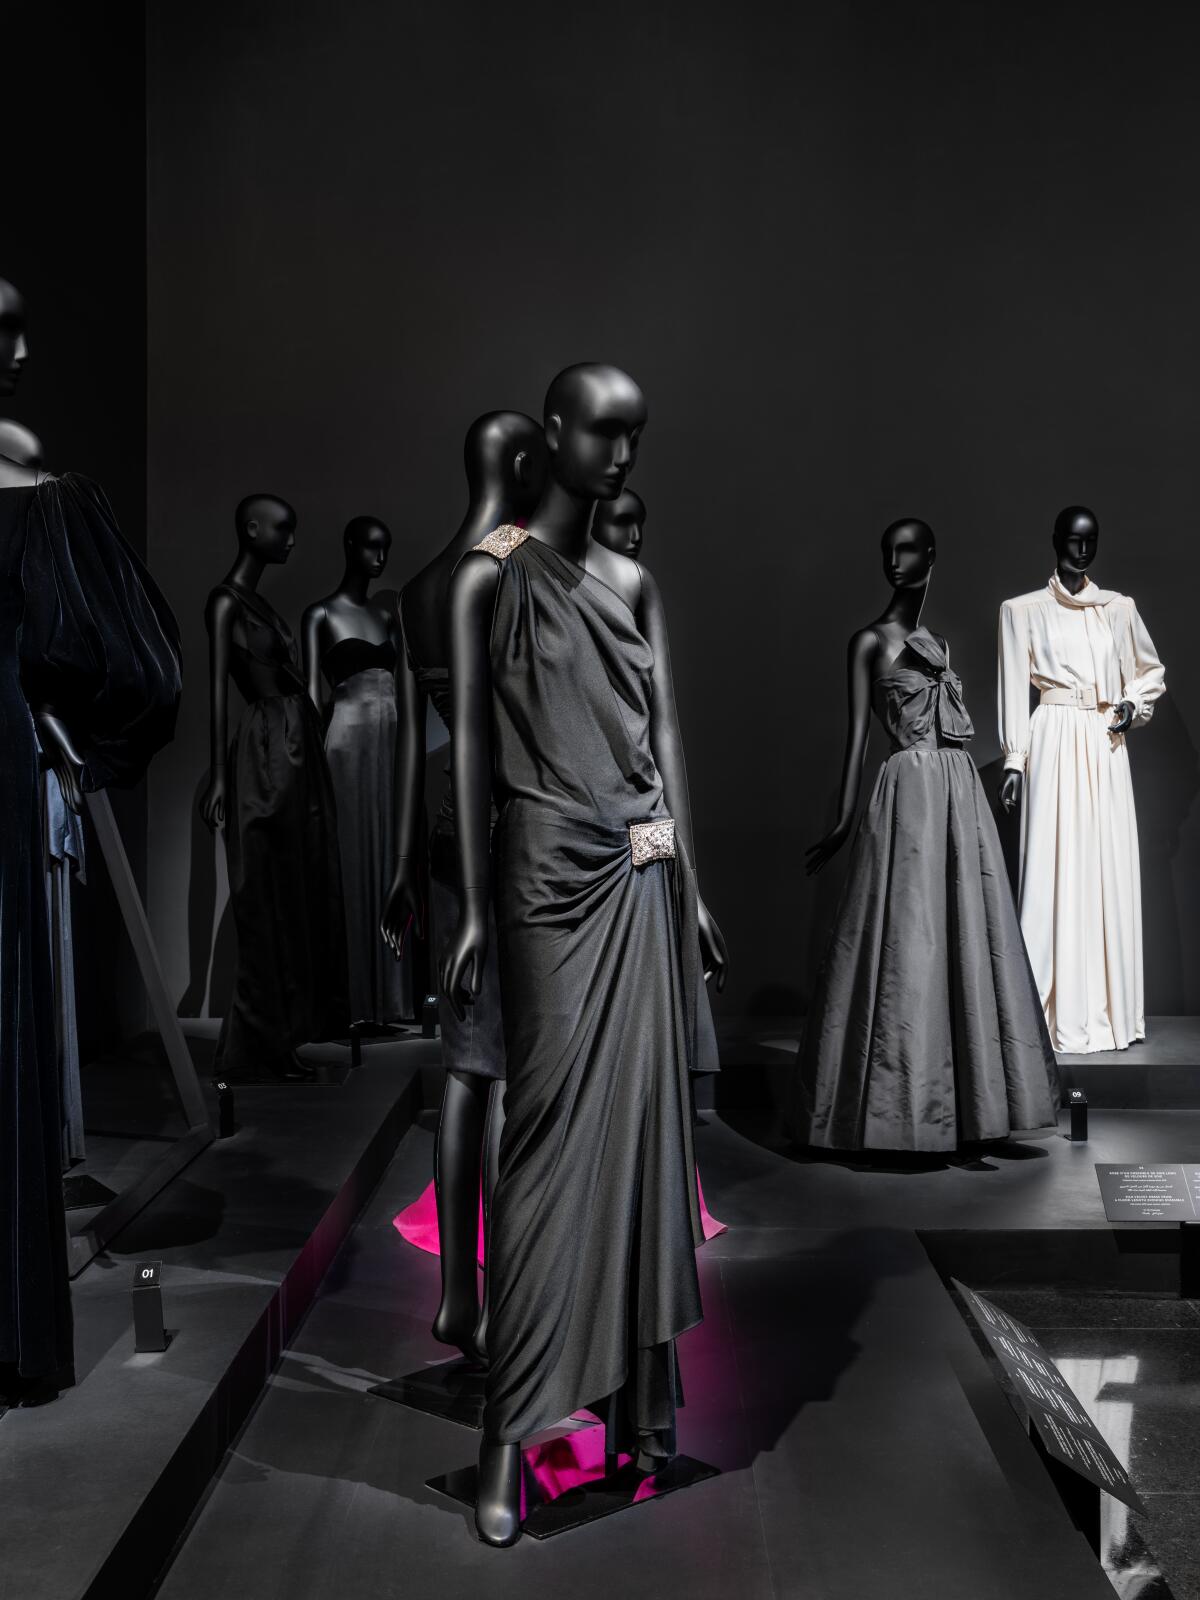 Evening dresses, capes and jewelry are on view at OCMA for "Yves Saint Laurent: Line and Expression."